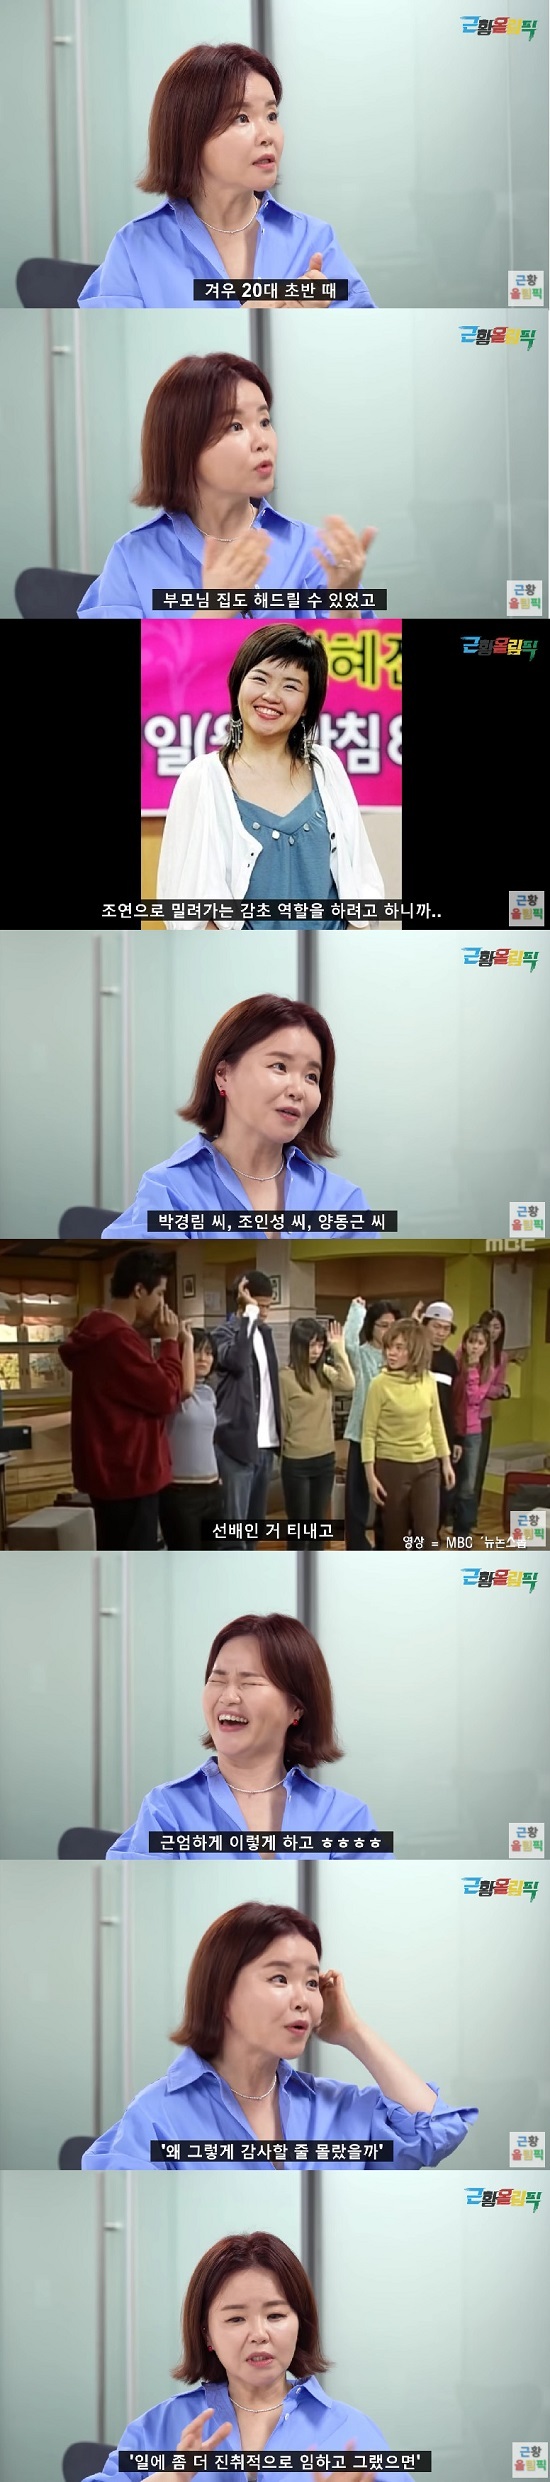 On the 31st, Recent Olympics YouTube channel, Gag Woman who was nationwide .. Wool Mom and Non-stopIn the video, Kim Hyo-jin said that he was living as a mother of two children at the age of 45 two years ago. I am glad that the second one was suddenly like a gift, but I was very embarrassed.Im healthy and I love each other a lot, he said.Kim Hyo-jin said, If you remember those who remember when you are a sweet girl, you are very surprised to see people in a mart or a market or something like this. My mother was married?He responded, he said.Kim Hyo-jin, who had been loved by a pretty character who appeared in the corner of Wool Mom on Good Day, recalled the corner, saying, I pretended to be a pretty little girl who was ugly and ugly.Kim Hyo-jin said, Unexpectedly, many people are so cute and funny, and now it is fixed.I told him to try to blink Seo Kyung-seok and me (the PD at the time) in line with the music.At first, Seo Kyung-seok and I suddenly came out of the music, blinking my eyes, and I wanted to be a little strange. But the reaction was really explosive, he recalled.When asked about the Rookie of the Year, Excellence Prize, and Grand Prize at various awards ceremony at the age of 22, Kim Hyo-jin said, I think I have almost taken a CF that I can take when I enjoy popularity. I started with electronic products and took haggas debt, confectionery, baking, ice cream, etc. I was able to do my parents house in my early 20s and I was able to buy my house, he said. You can think that then I will be enormous now.Referring to his appearance in the Non-Stop, Kim Hyo-jin said, In fact, it was the story of the early years of the company at the beginning of the Non-Stop.Unfortunately, the ratings were low and the reorganization was made again, New Non-stop.Jo In-sung, Jang Na-ra, and Lee Ji-nis teen stars will be in front of the main character, and I will be cast as a licorice role and assistant role.I am so grateful now, he said. At that time, I was loved by a lot of beautiful and started with the lead role at first, but I want to act as a licorice to be pushed to the supporting role.I am only 3 to 4 years old with my Friends, but suddenly I feel older, and my mind was a little slumped. Kim Hyo-jin said, I am sorry that Park Kyung-lim, Jo In-sung, and Yang Dong-geun have not been able to get along well with these Friends.I was a senior, I was solemn, he said. I do not have a few years difference, but I think I was trying to pretend to be solemn and teach. When I think about it, I really think that I really want to kick a quilt, Why did I do it? Why did I not know I was so grateful?Kim Hyo-jin said, I was constantly broadcasting, but it is true that I can not do it as actively as before.He said that his first child was born, Burnout, and depression came, and that he was saddened to see the coming of the female gag woman era.I was saddened by my own idea that if I did not marry and had no children, if I had been more enterprising to work, I could not have worked together at that edge.Photo: YouTube Channel The Current Olympics